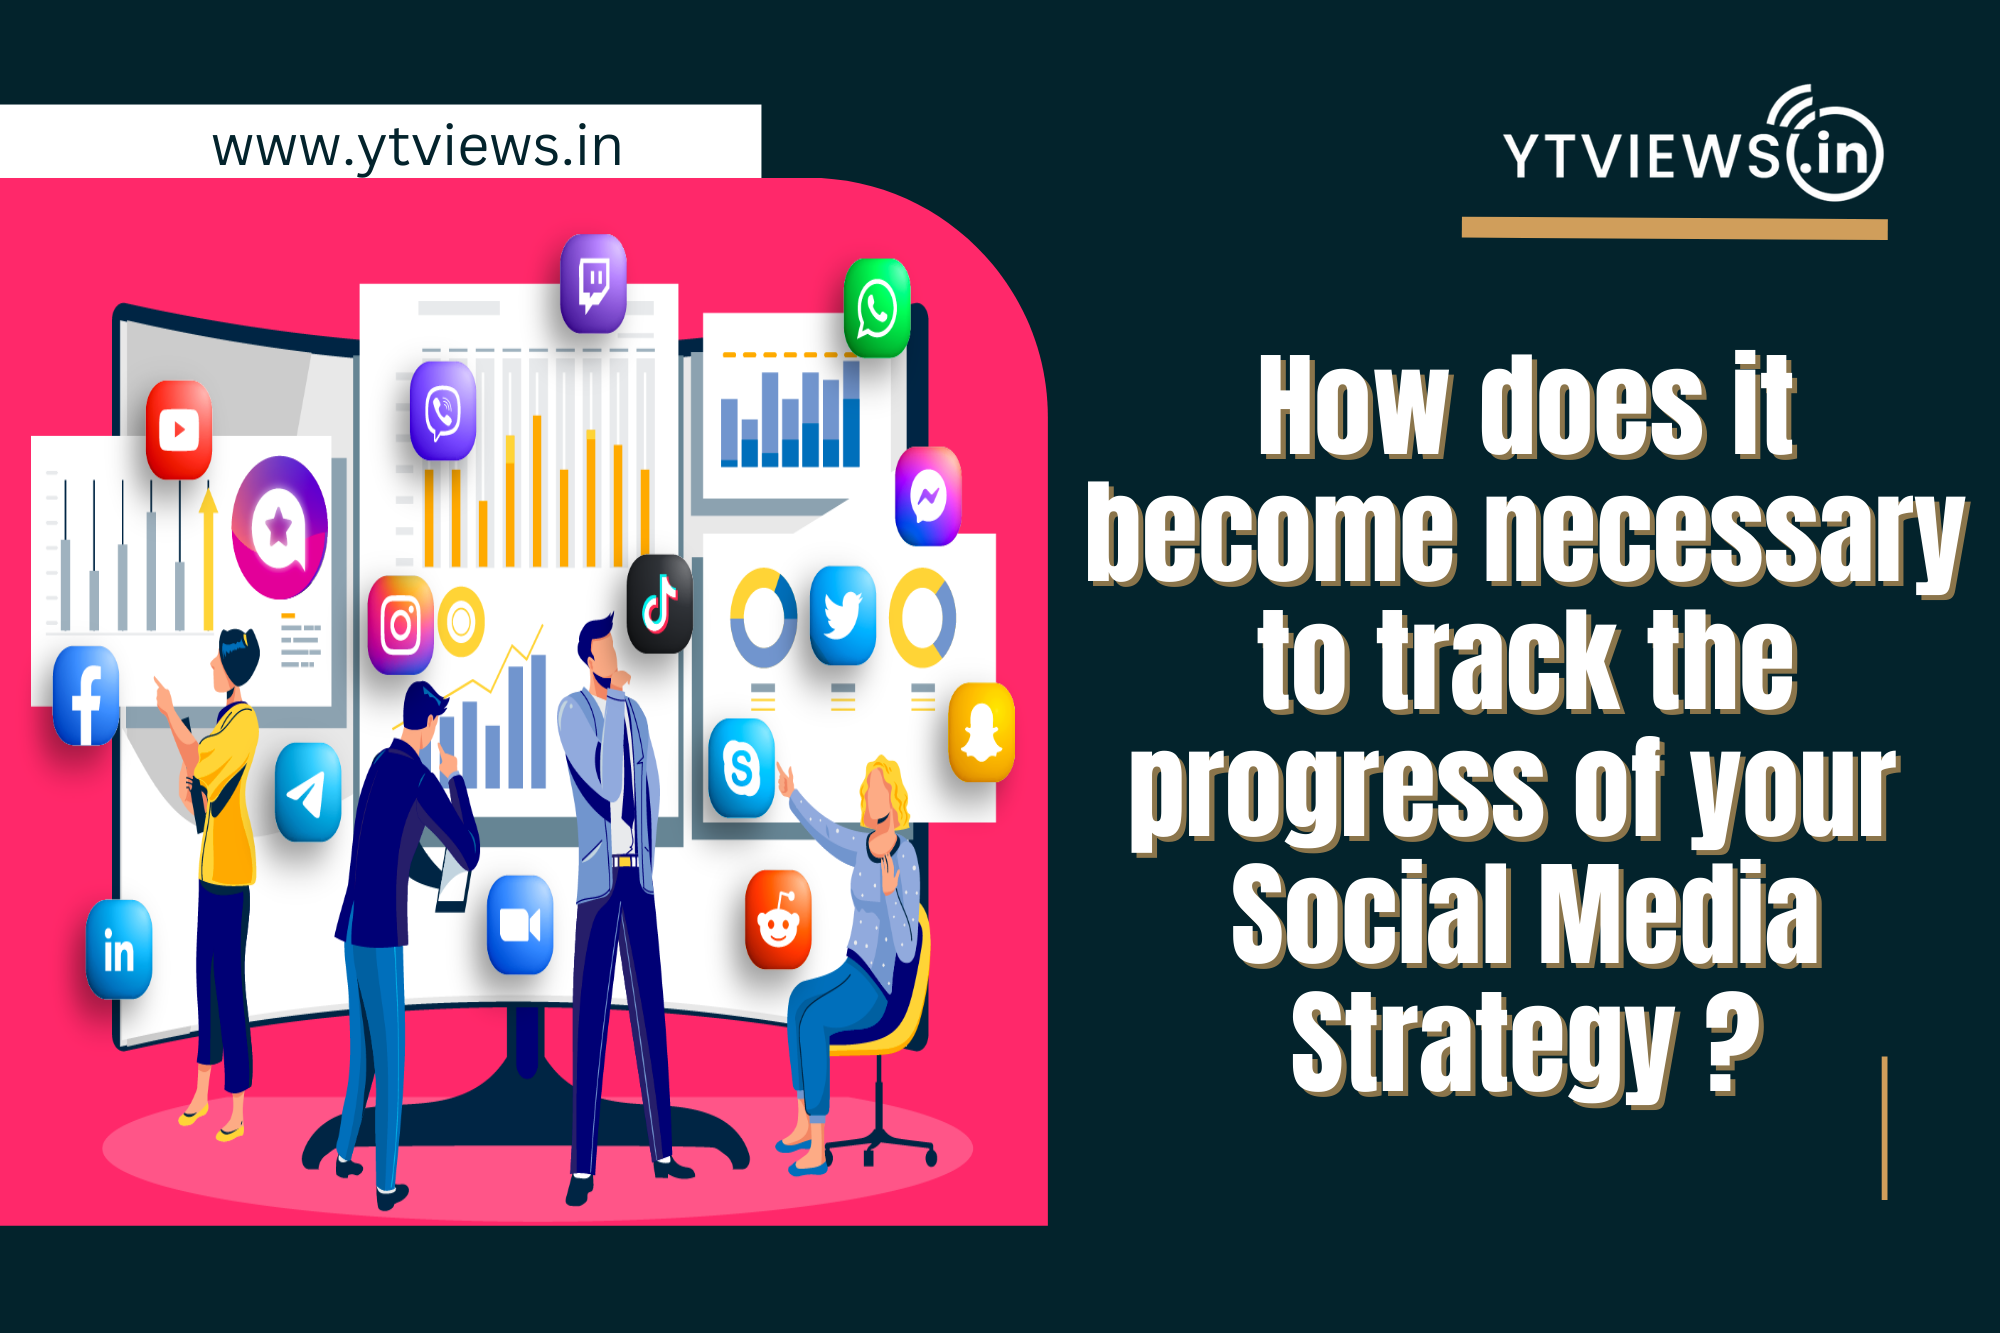 How does it become necessary to track the progress of your social media strategy